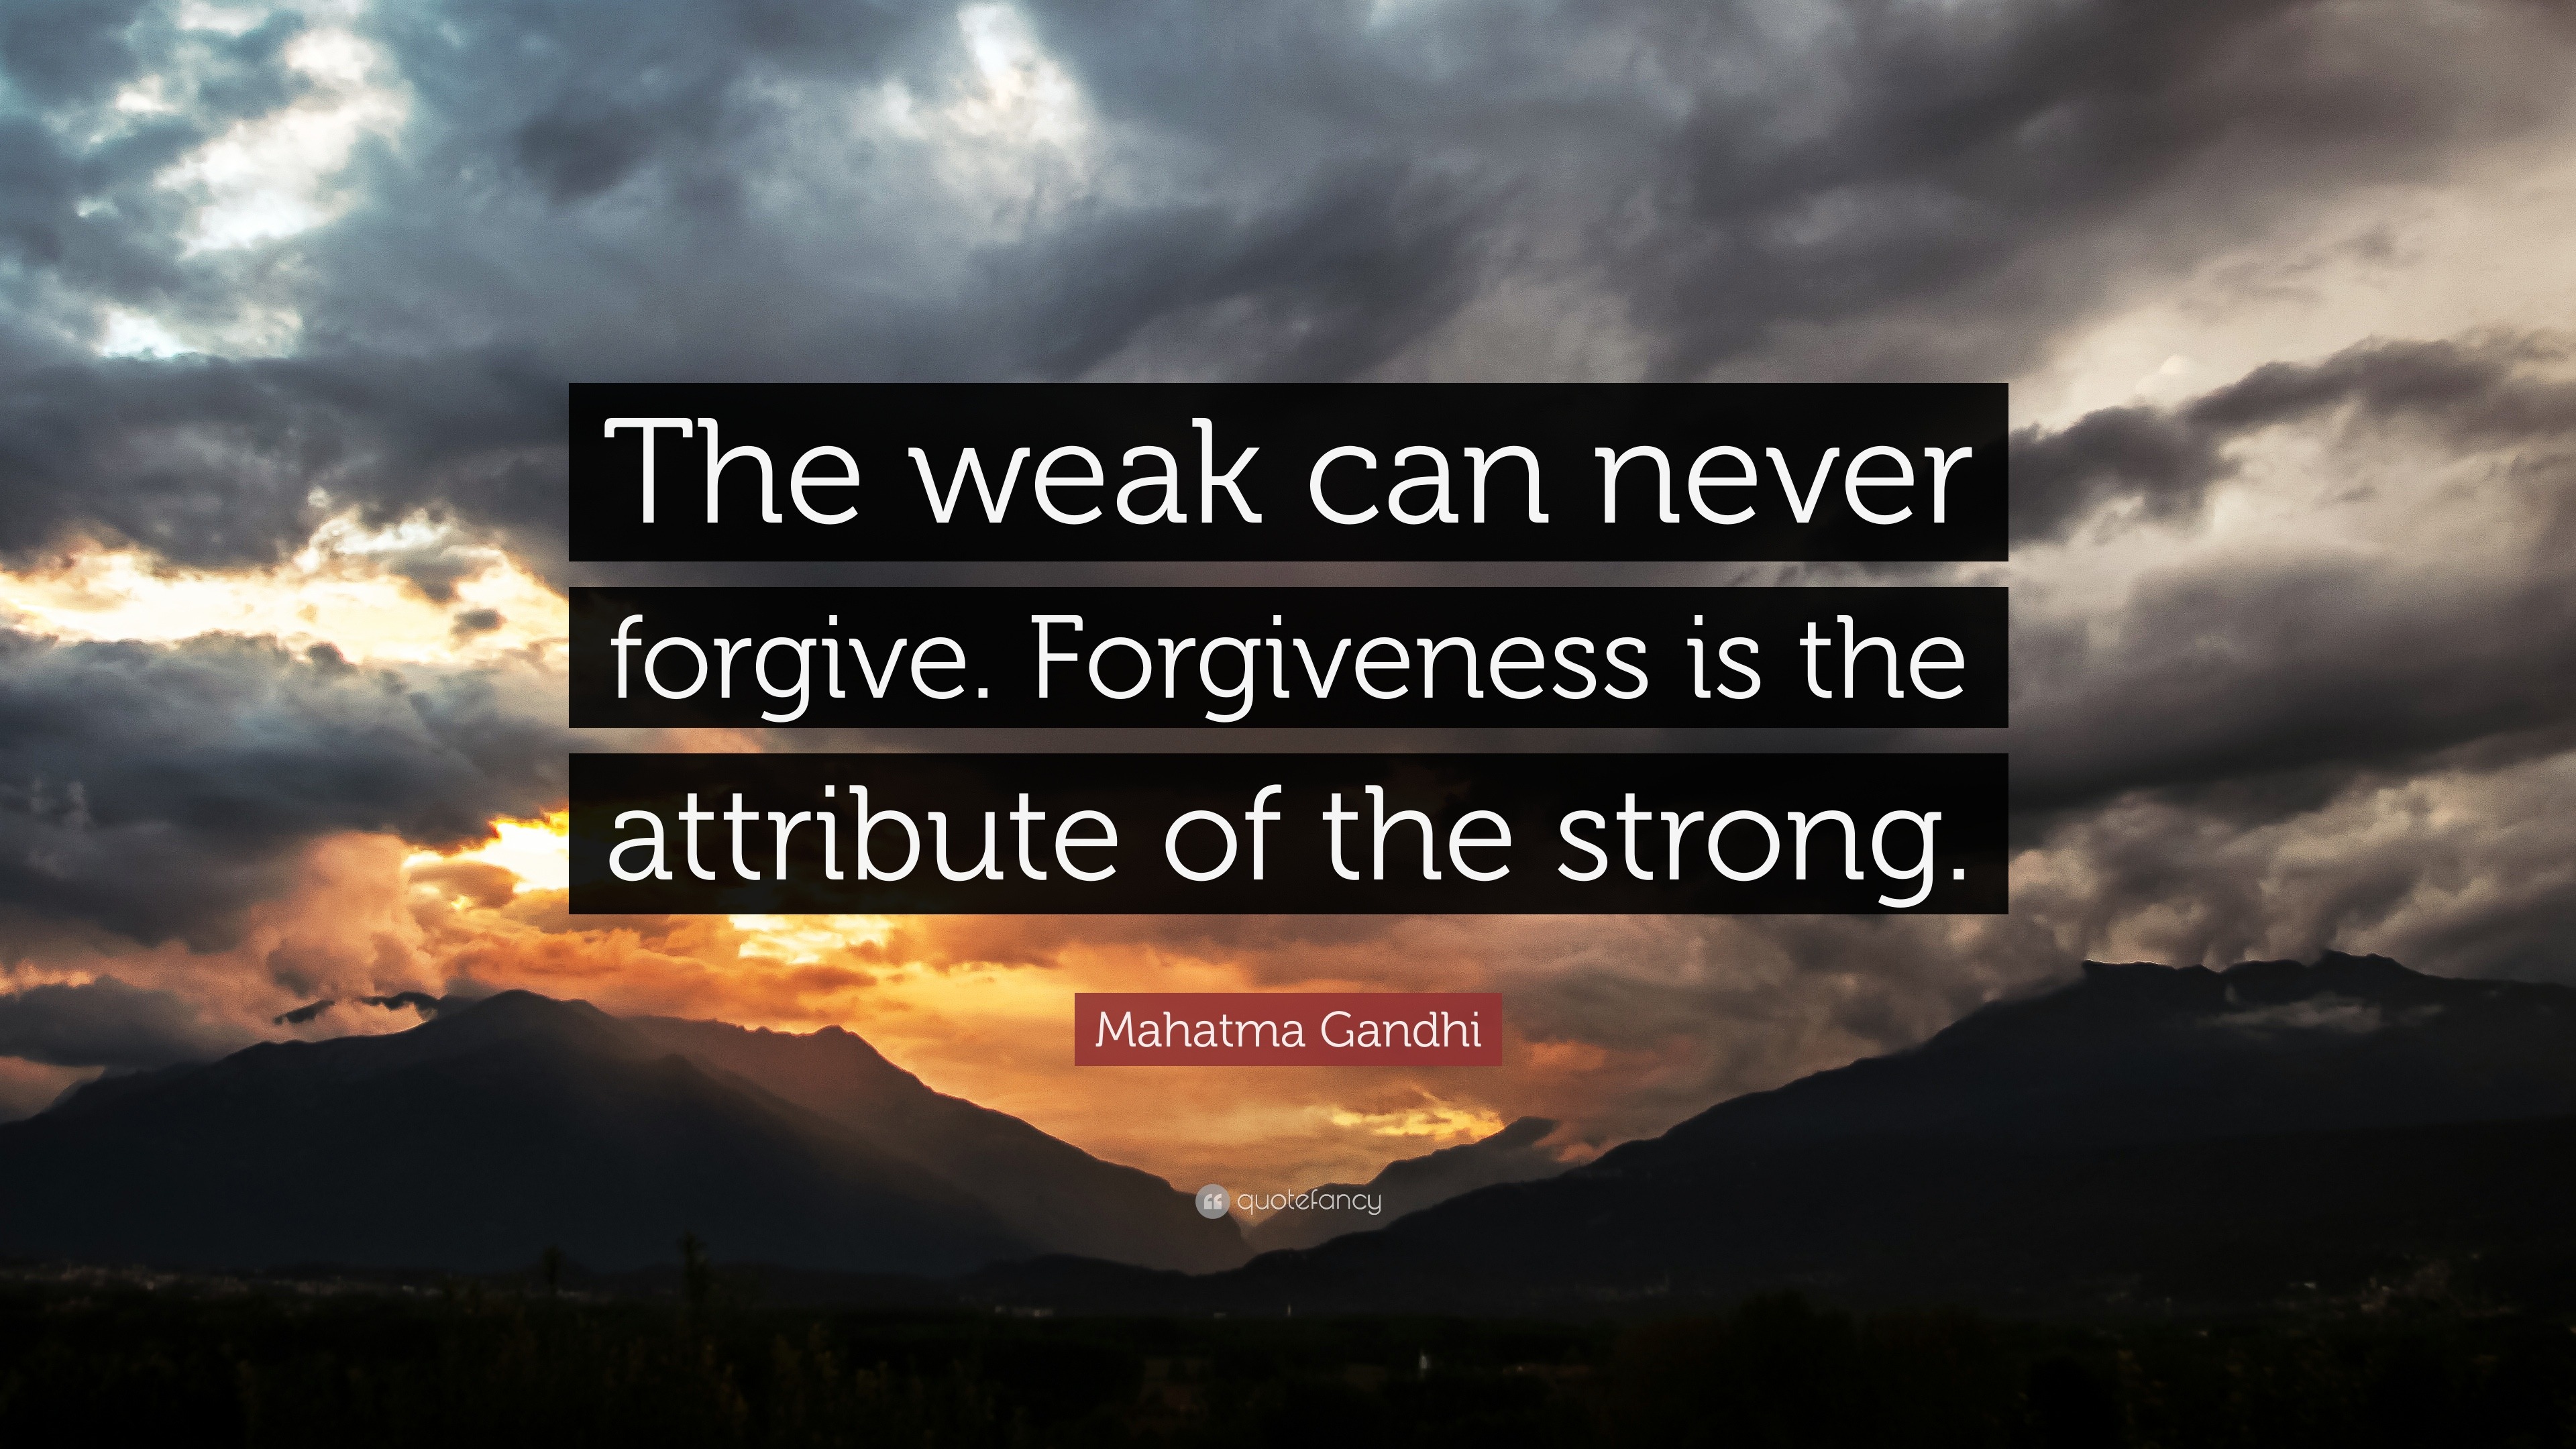 Mahatma Gandhi Quote “The weak can never forgive Forgiveness is the attribute of